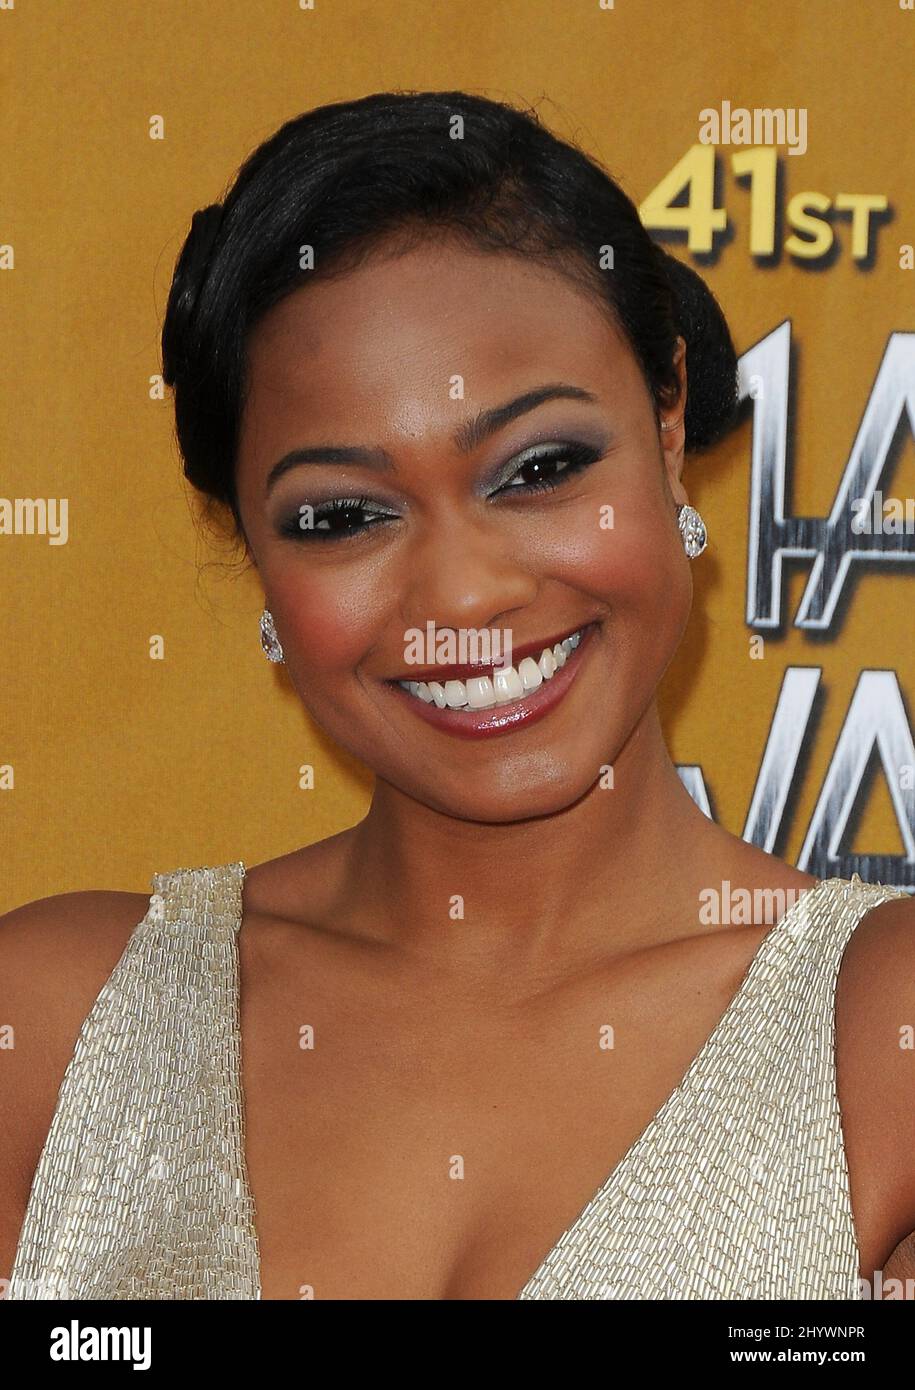 Tatyana Ali arriving for the 41st NAACP Image Awards held at the Shrine Auditorium in Los Angeles, California, USA. Stock Photo